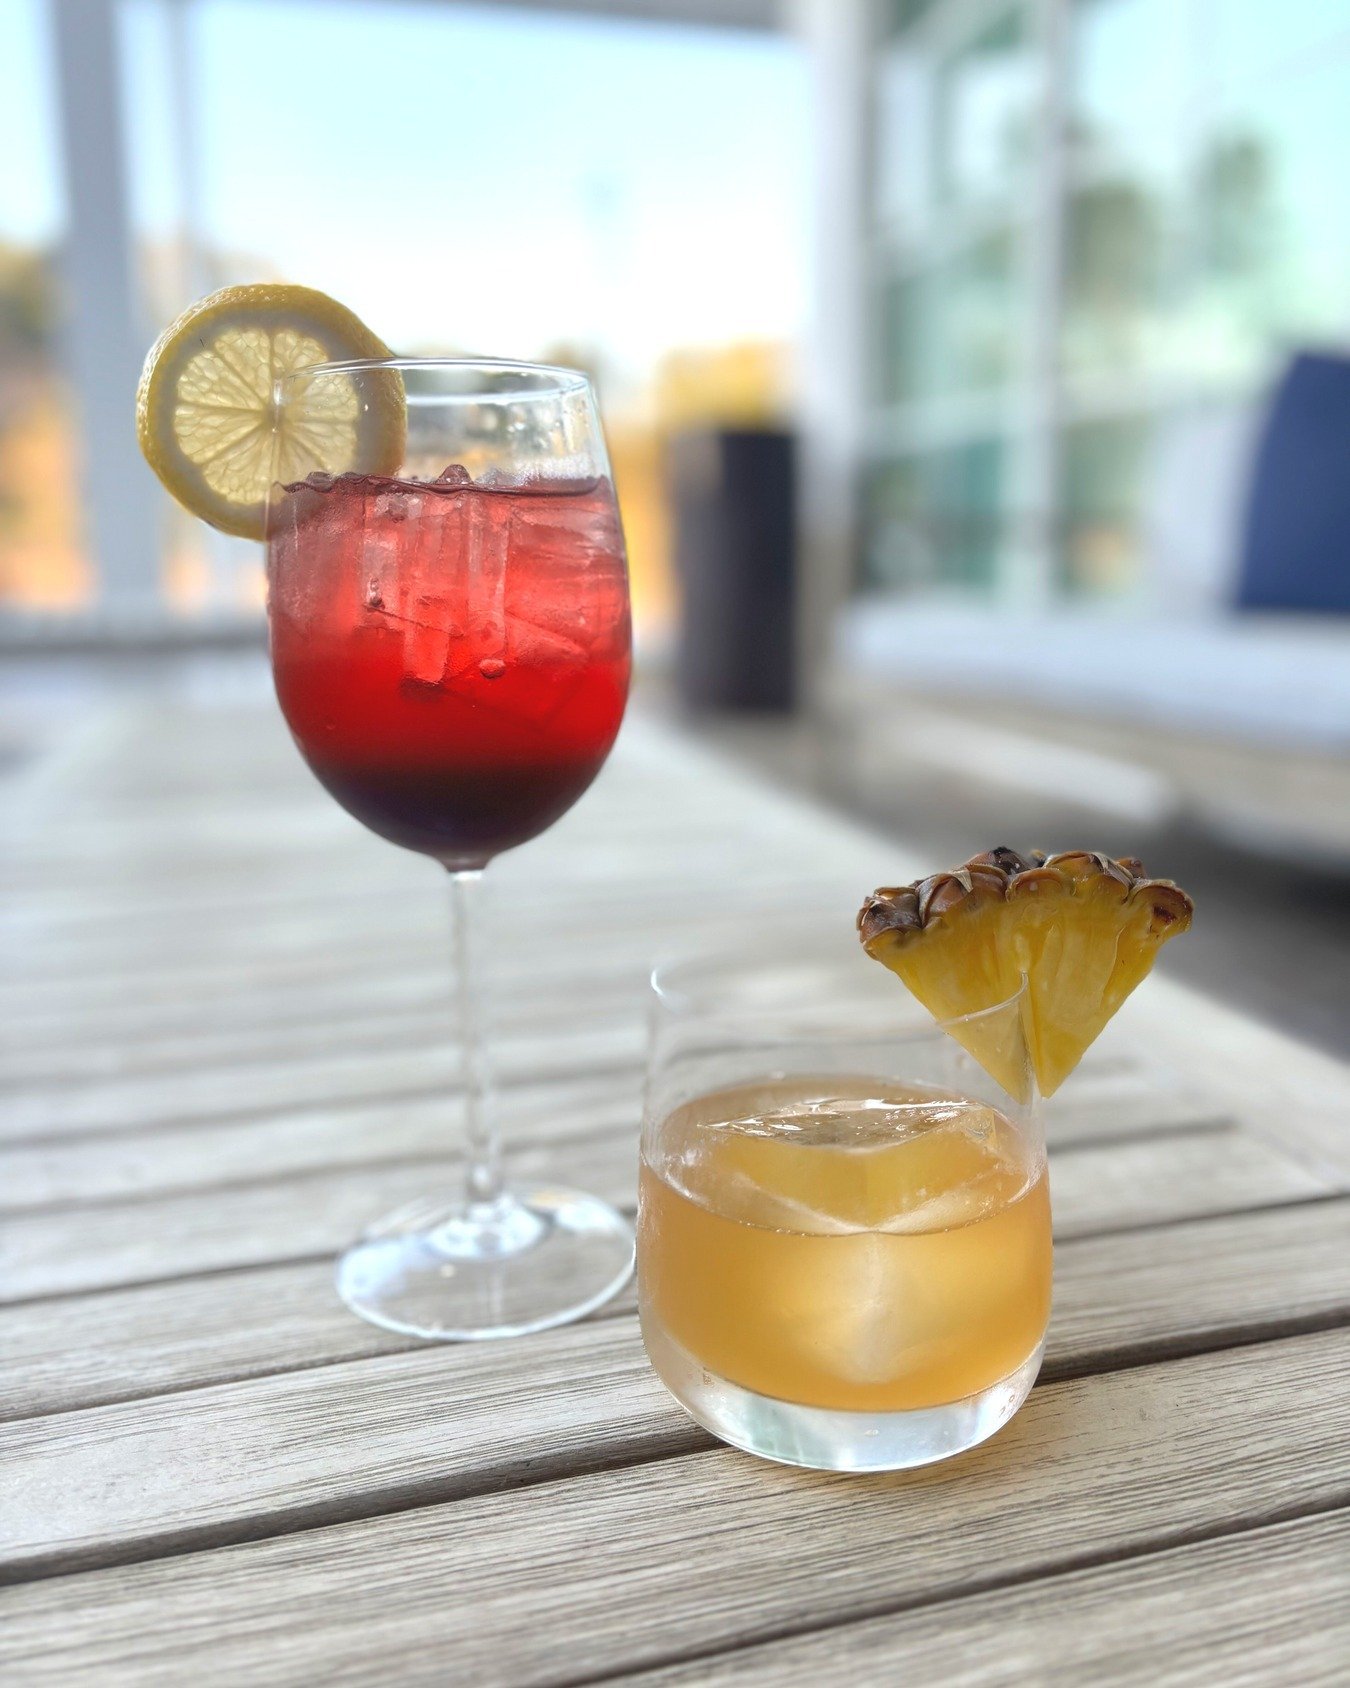 That Friday feeling😎 Enjoy a cocktail on our covered patio tonight!